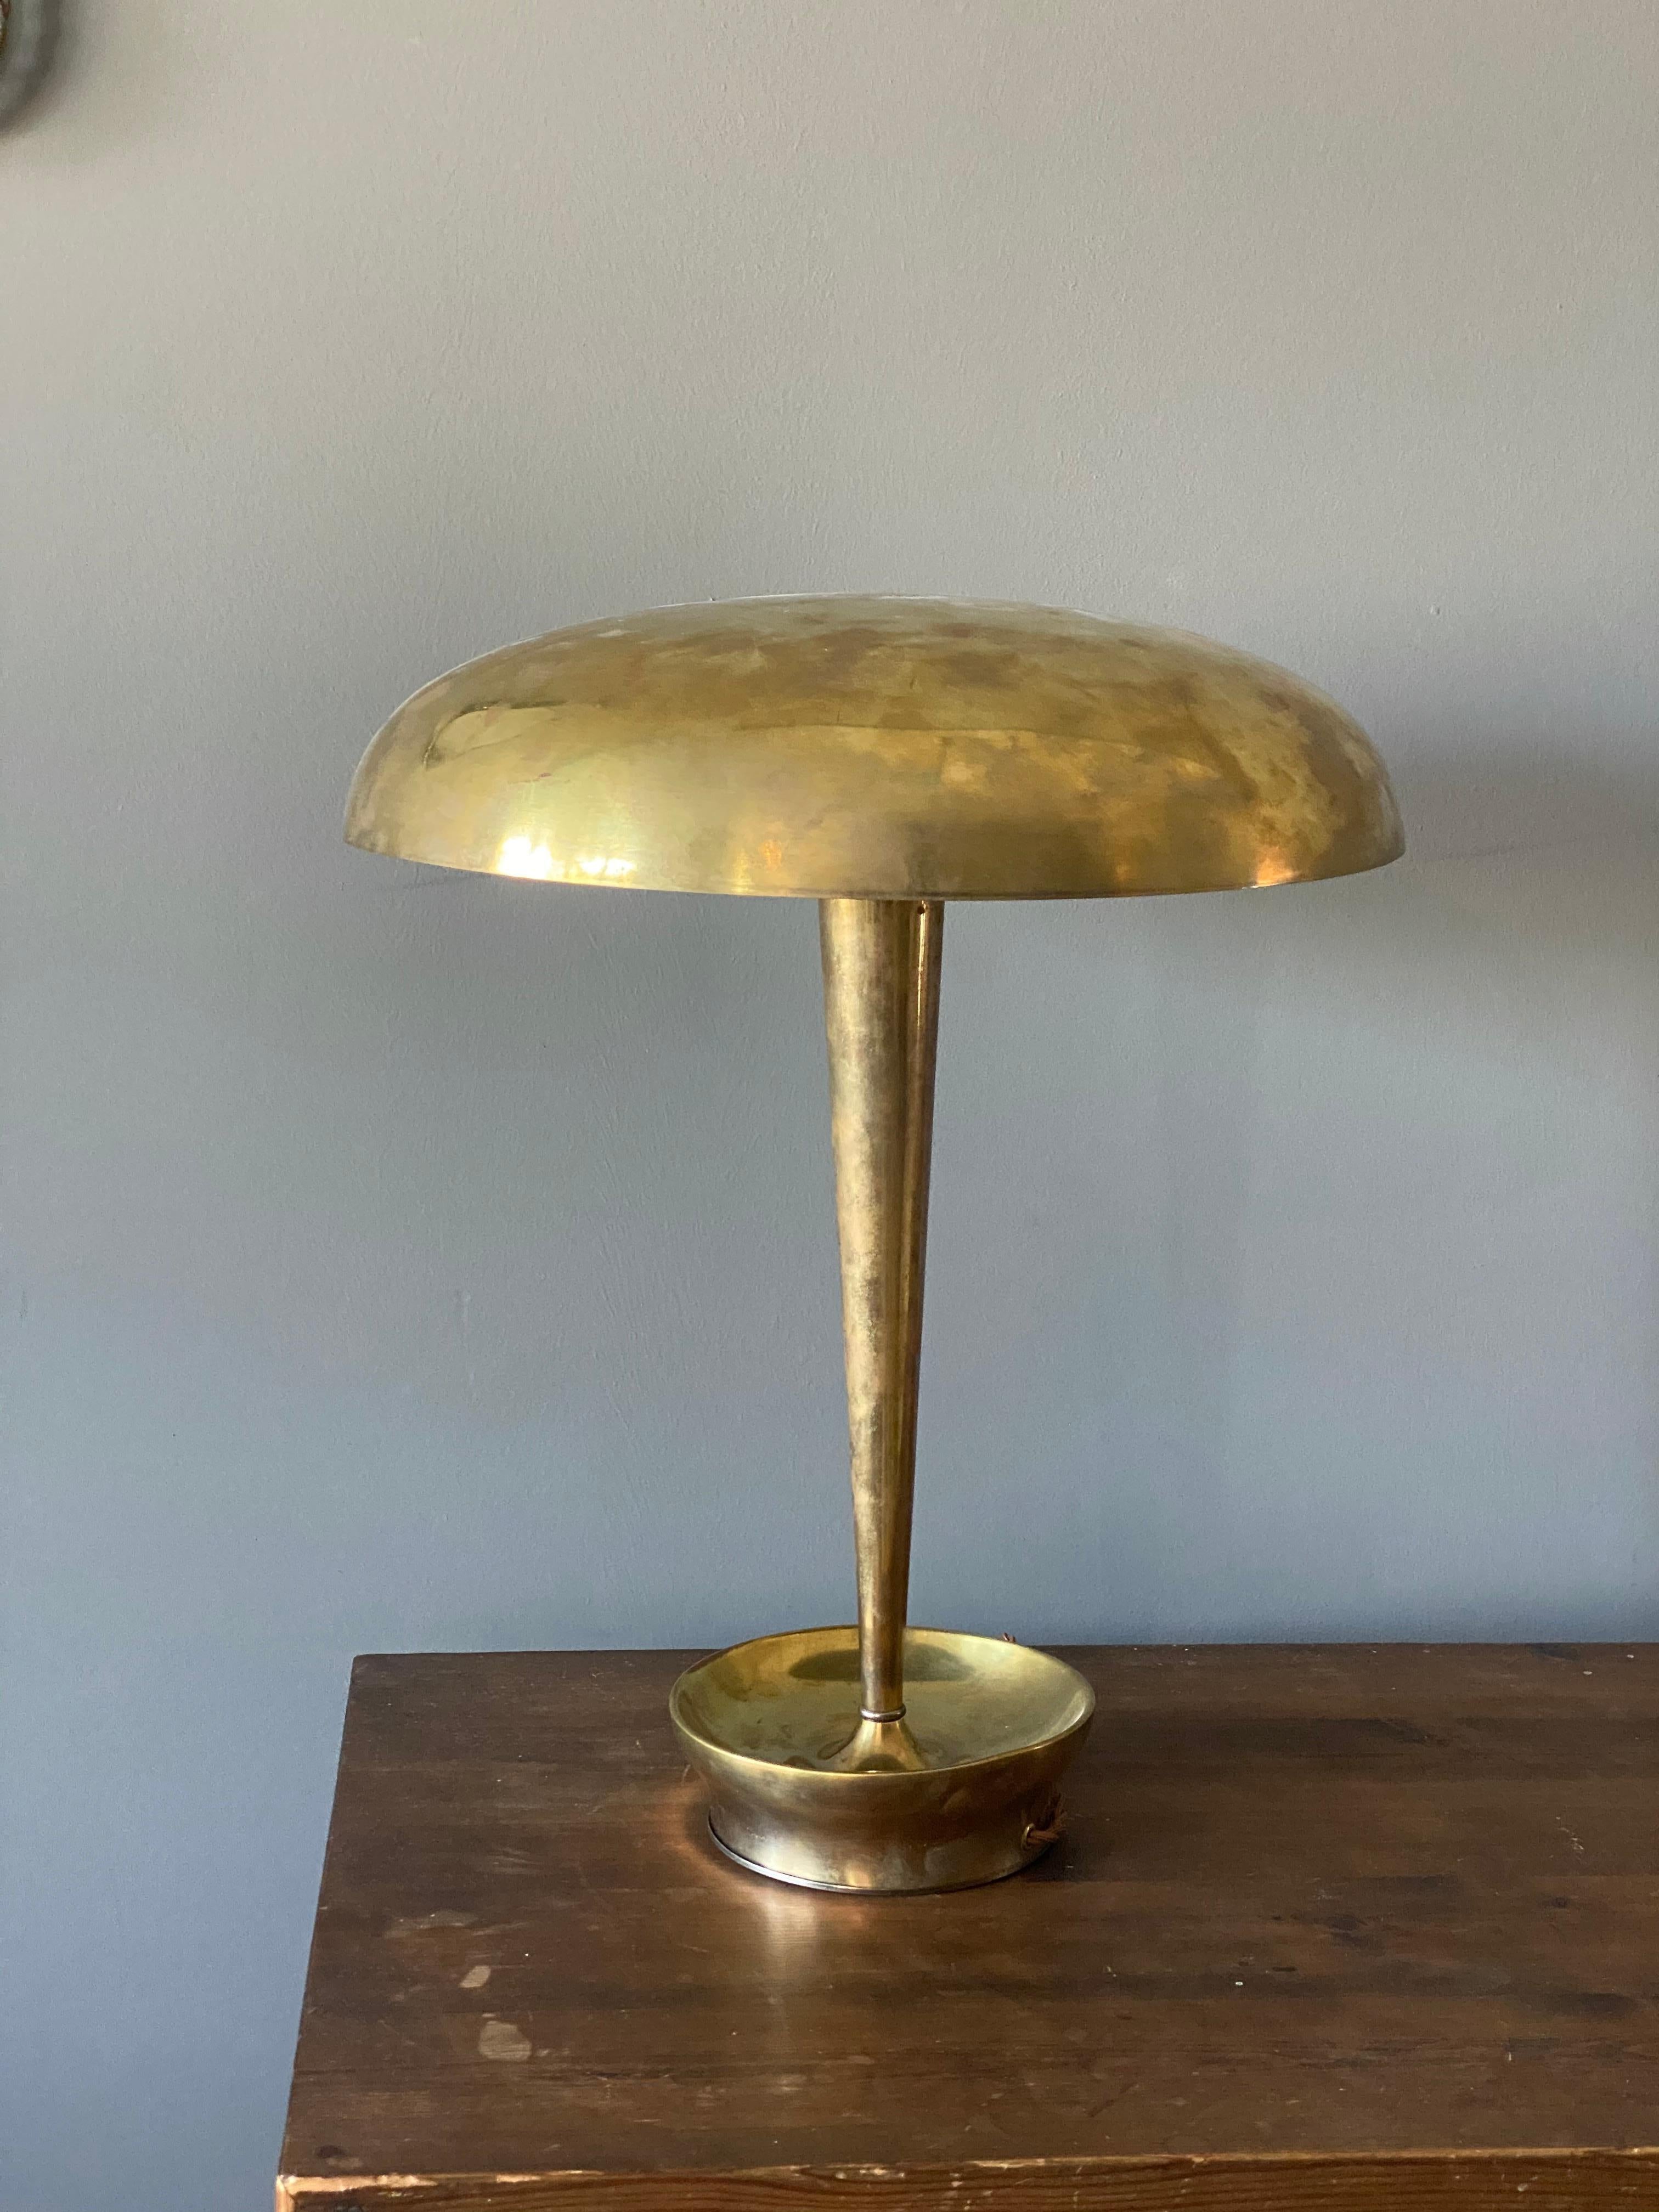 A table lamp / desk lamp produced by Stilnovo, Italy. Produced in brass, chromium-plated metal, and opaque glass.

    



   